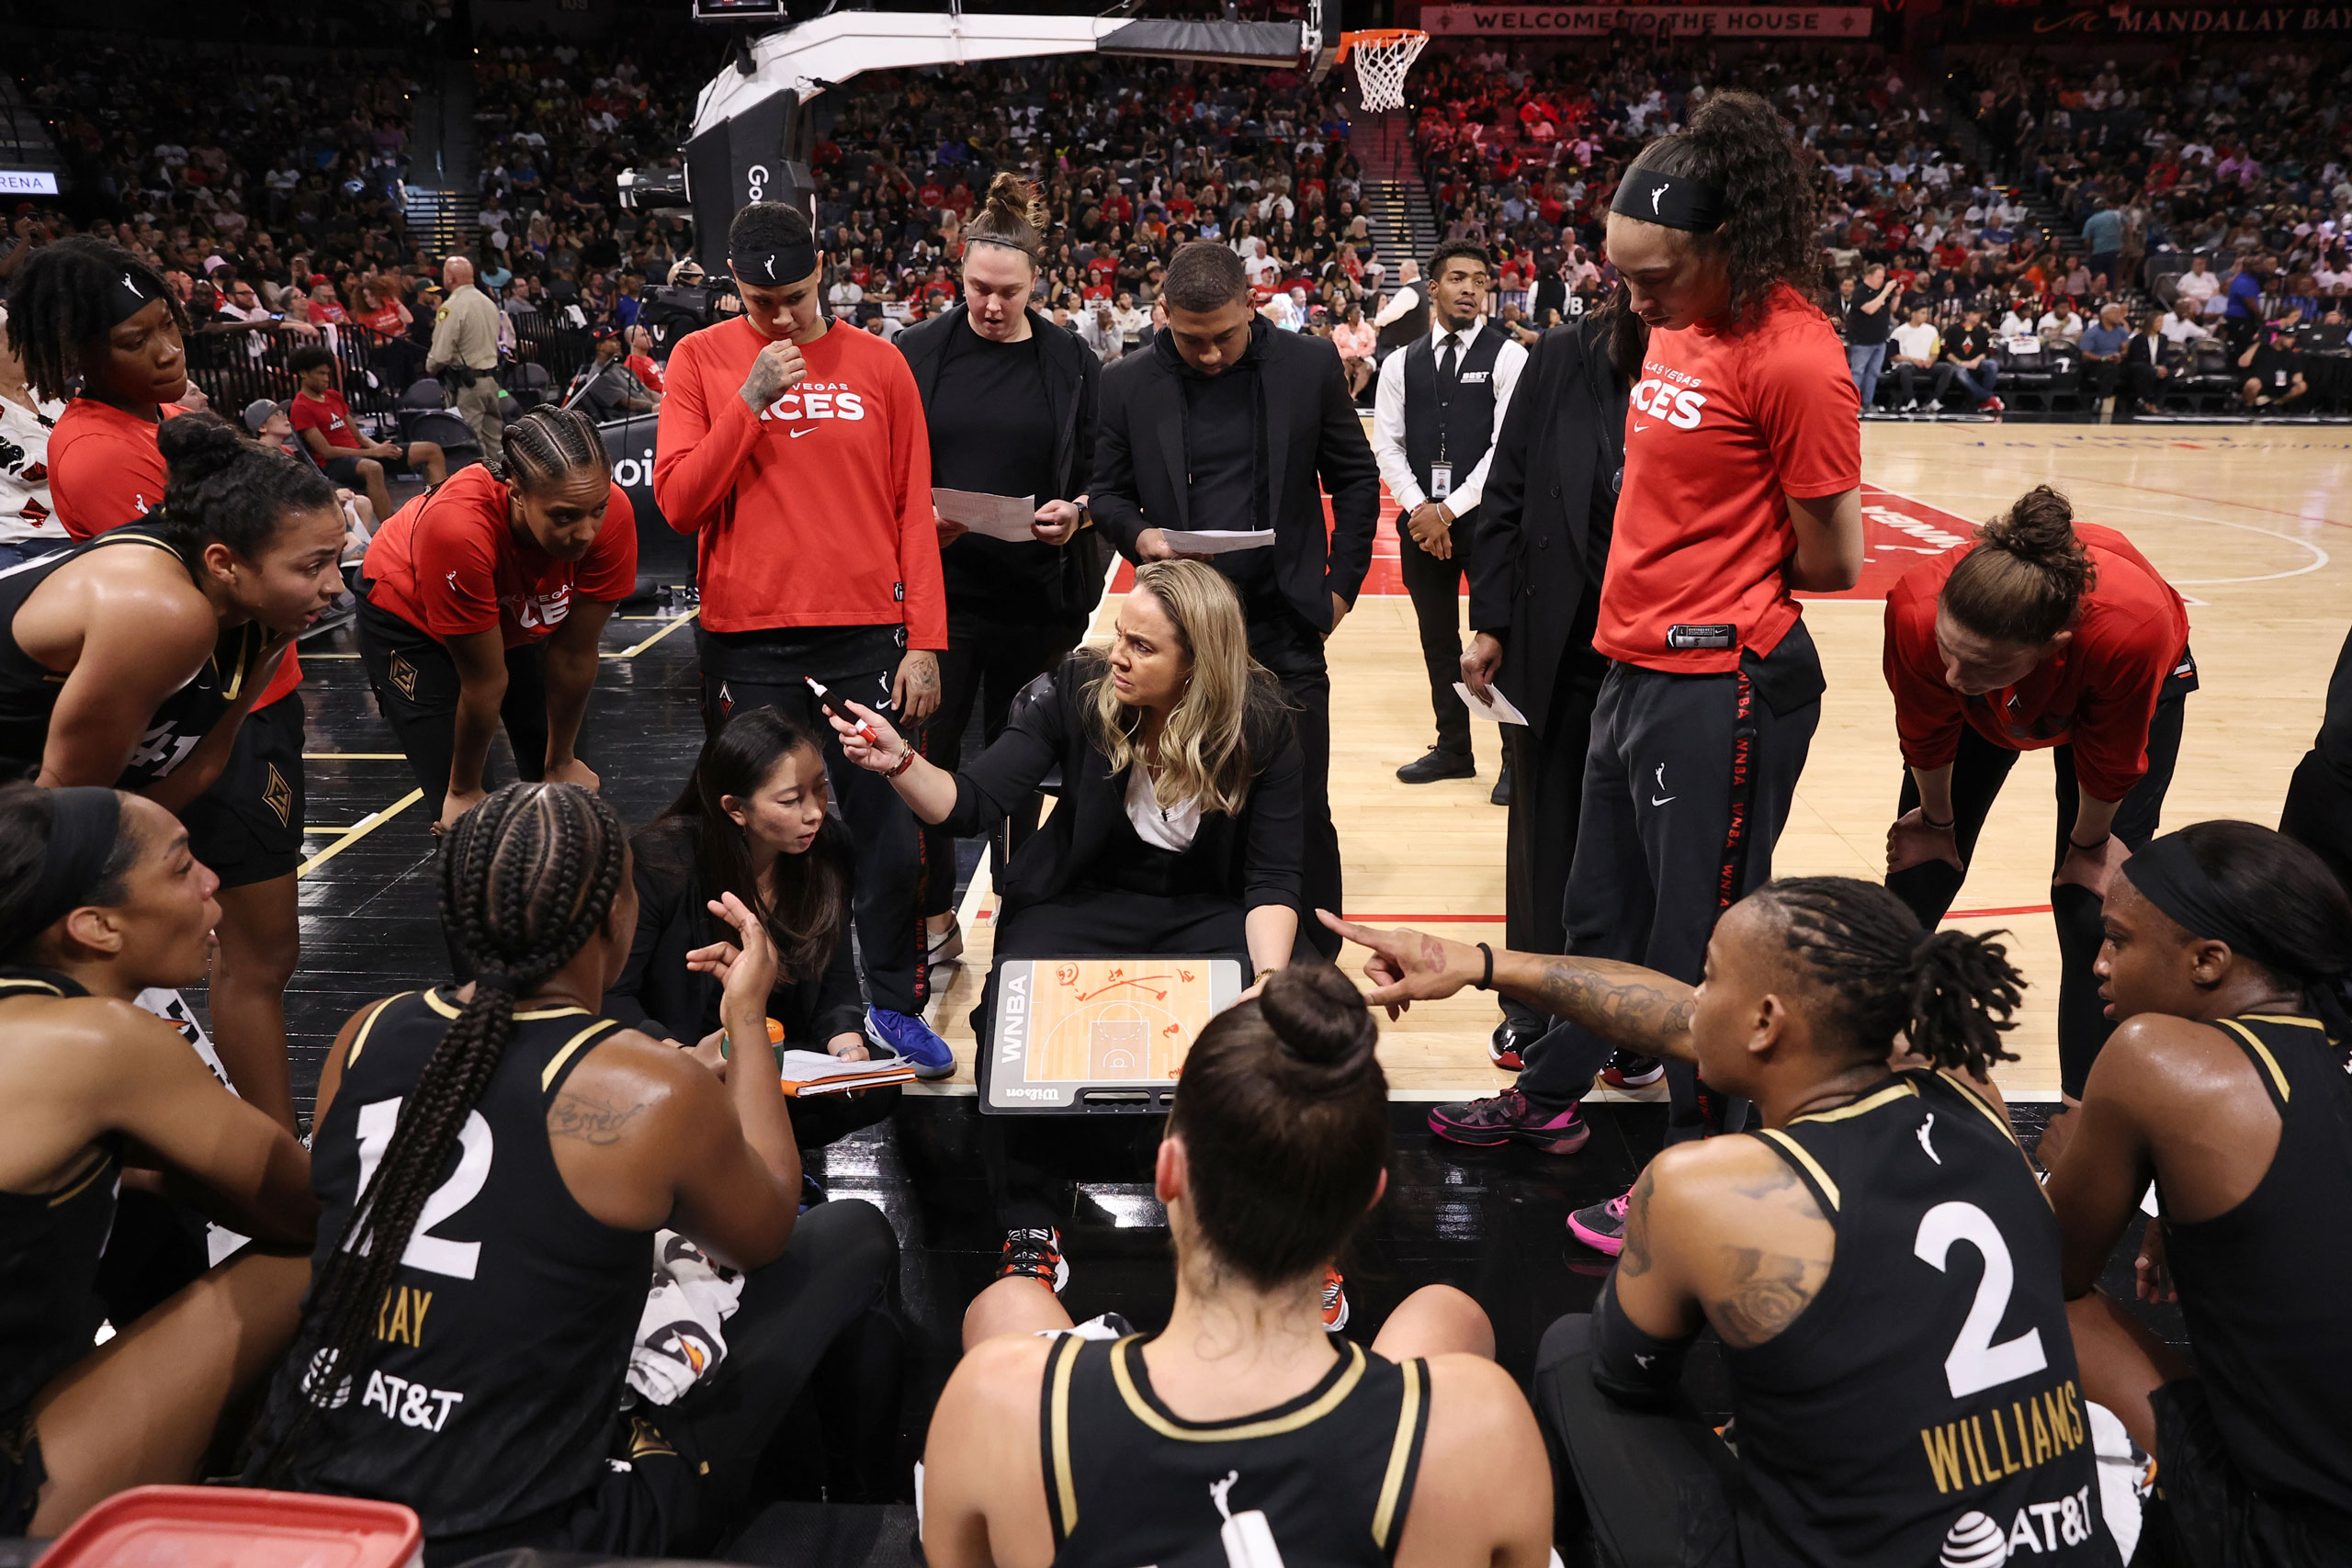 Las Vegas Aces head coach Becky Hammon leads a huddle during Game 2 in the second round of the 2022 WNBA Playoffs on Aug. 31, 2022. (Mike Kirschbaum—NBAE/Getty Images)